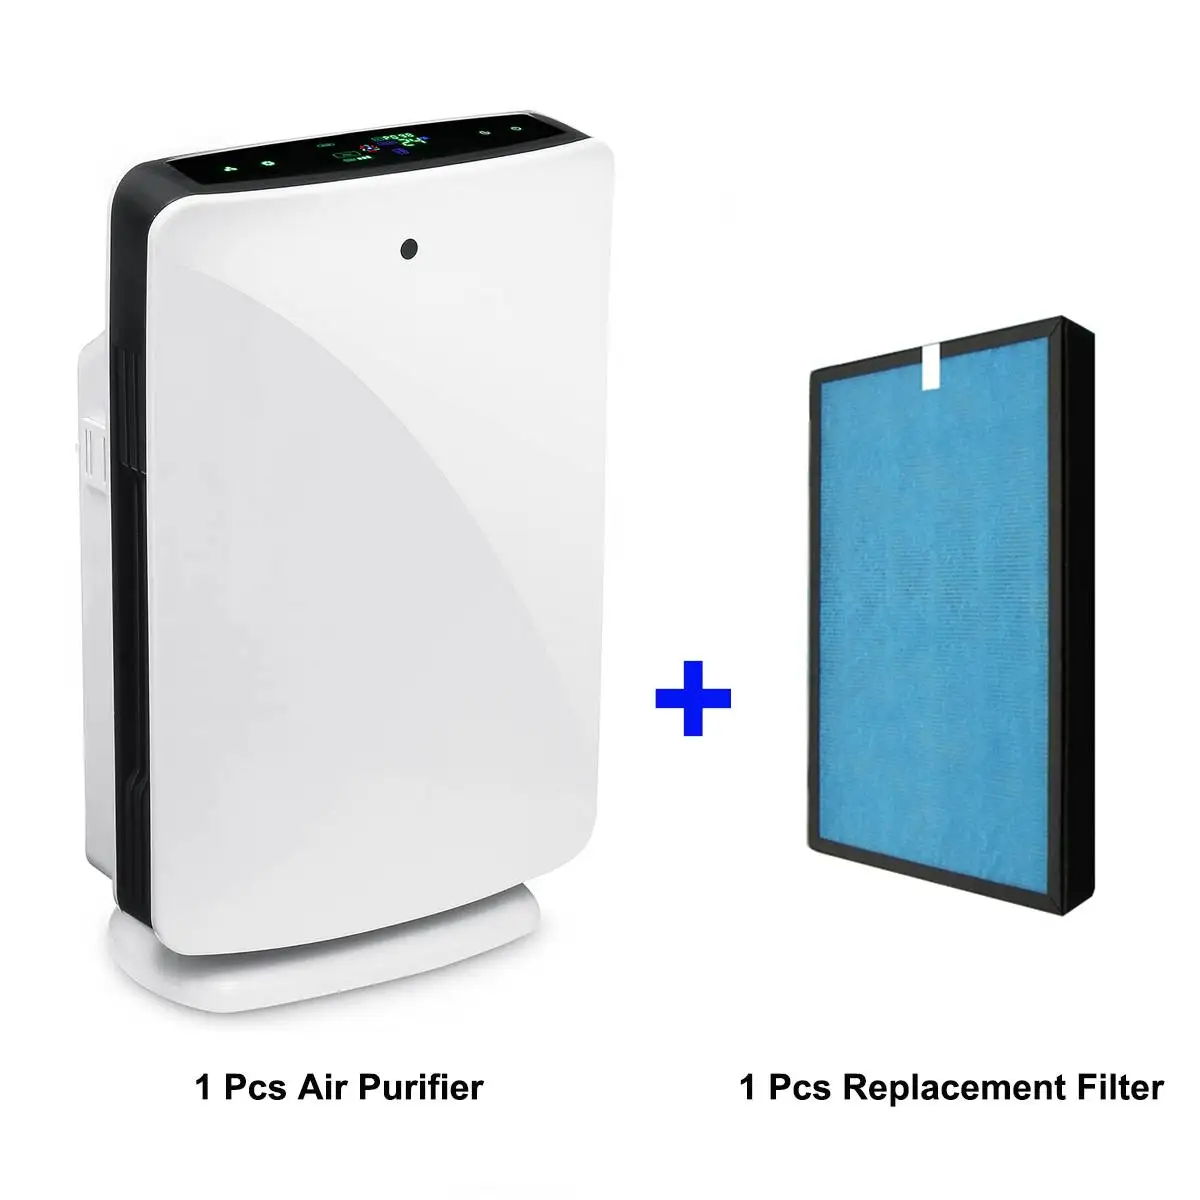 

AUGIENB Air Purifier with True HEPA Filter Home Office Odor Allergies Remover for Smoke Dust VOCs Pollen Pet Dander PM2.5